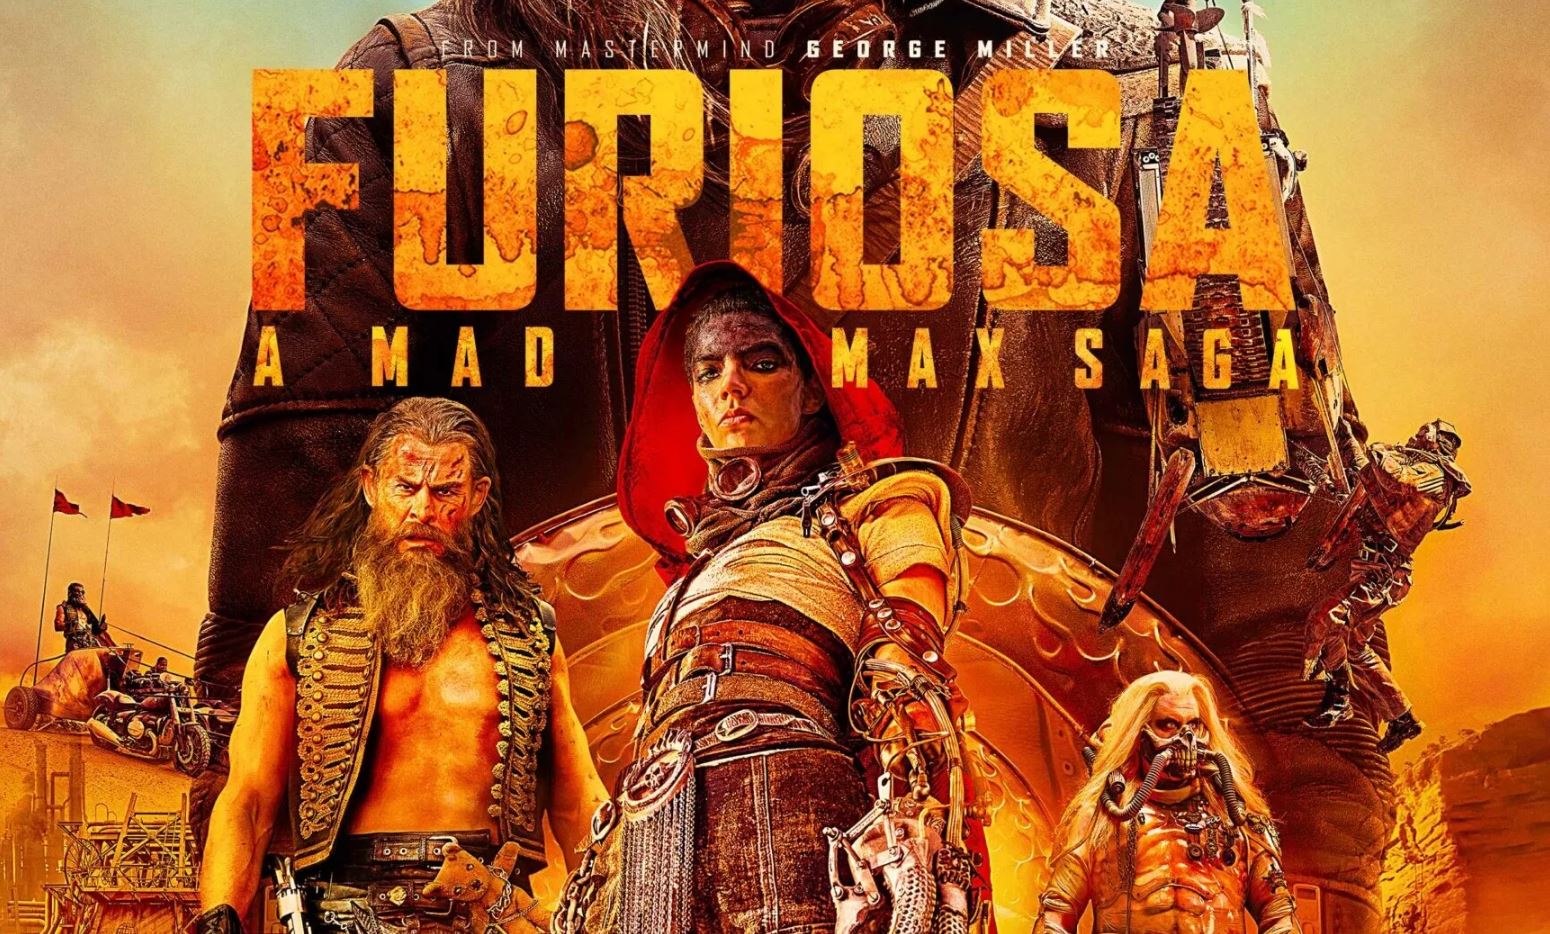 Furiosa A Mad Max Saga’ Is Now Available to Watch at Home